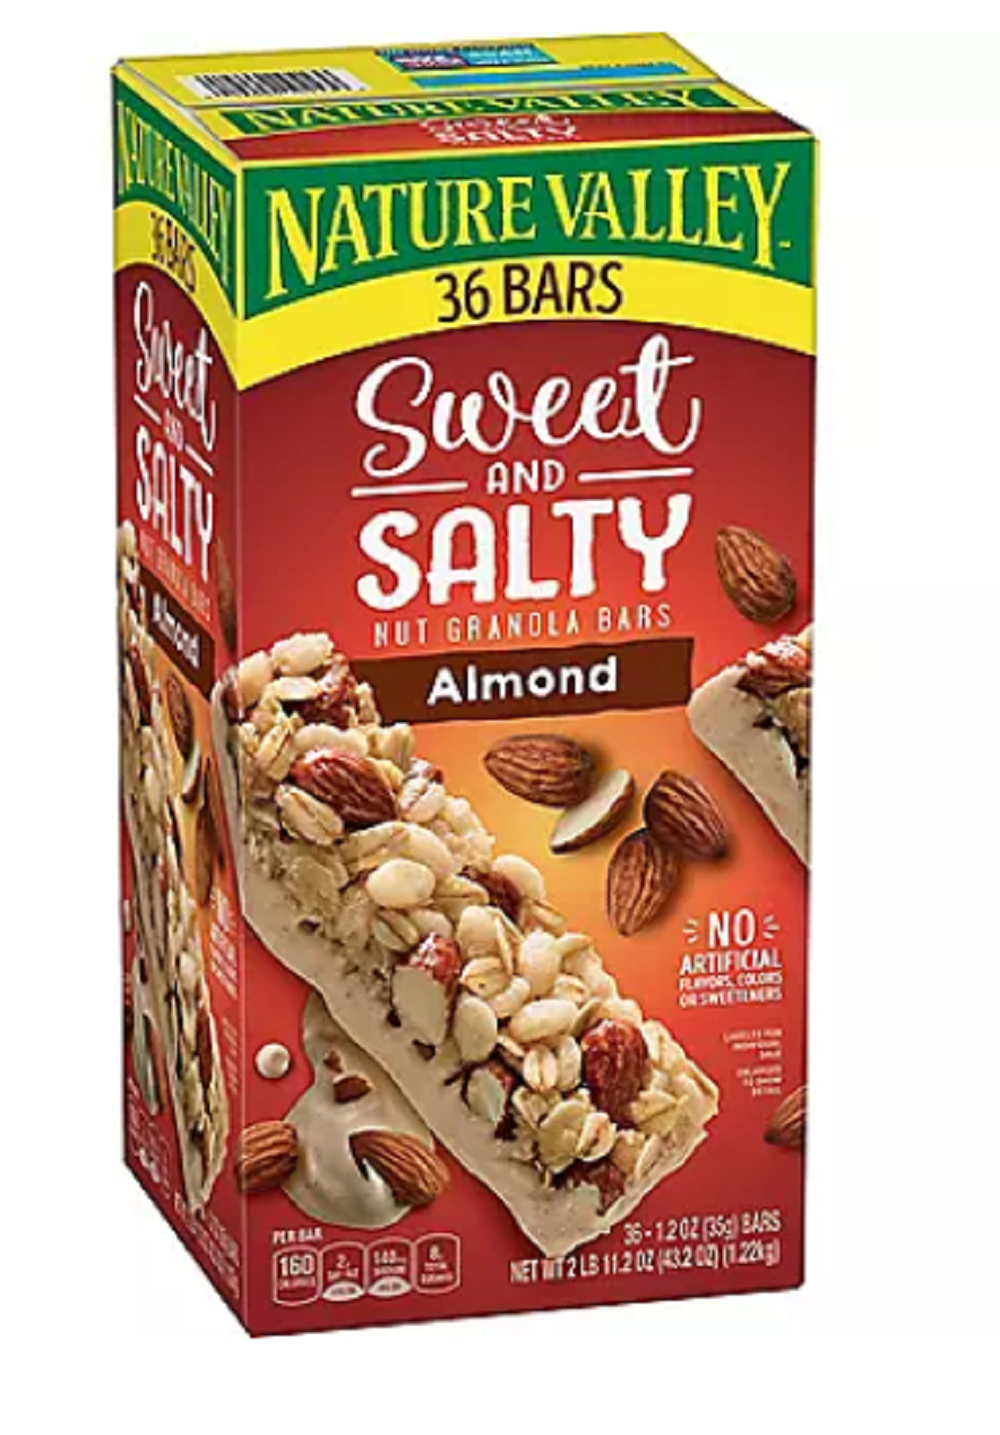 An Item of Nature Valley Sweet & Salty Almond Granola Bars (1.2 oz, 36 ct.) - Pack of 1